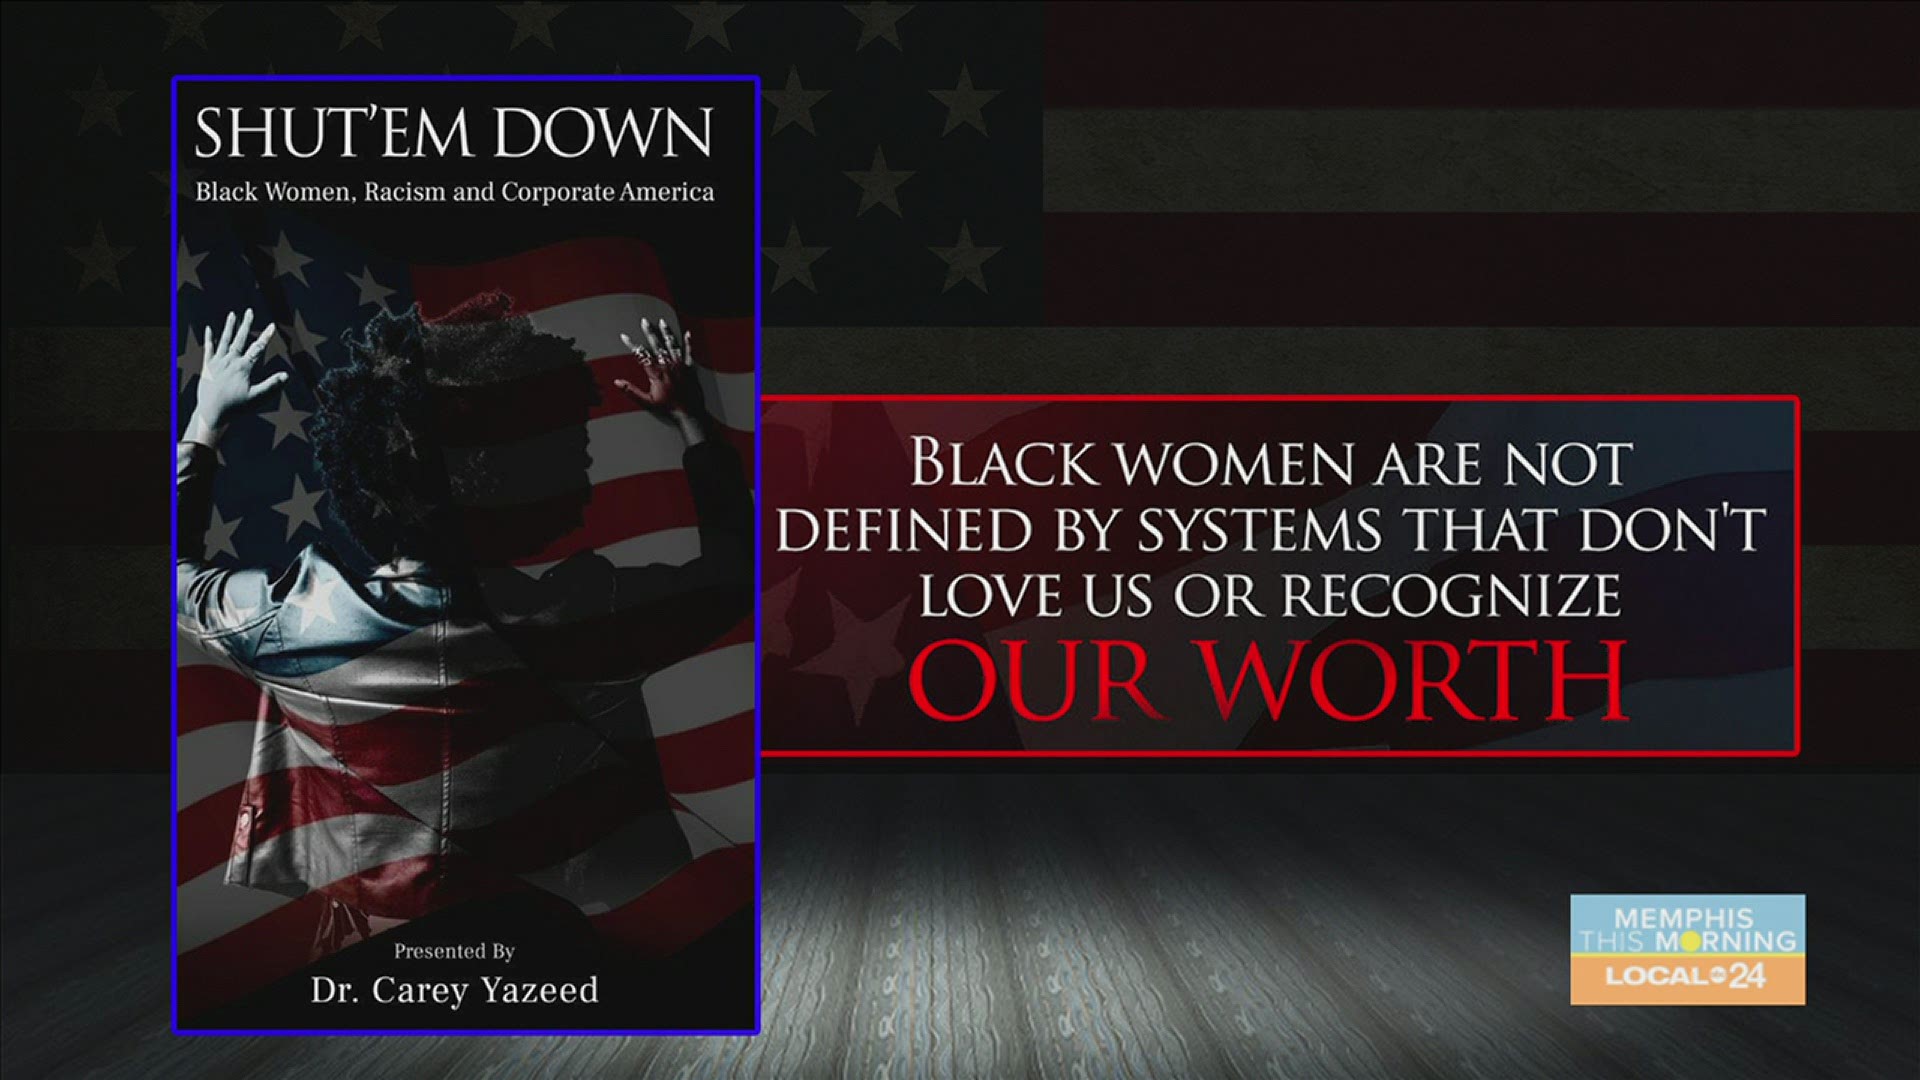 Carey Yazeed, Ph.D. joins John Paul on the Memphis This Morning Show to talk about her new book "Shut 'Em Down: Black Women, Racism & Corporate America"